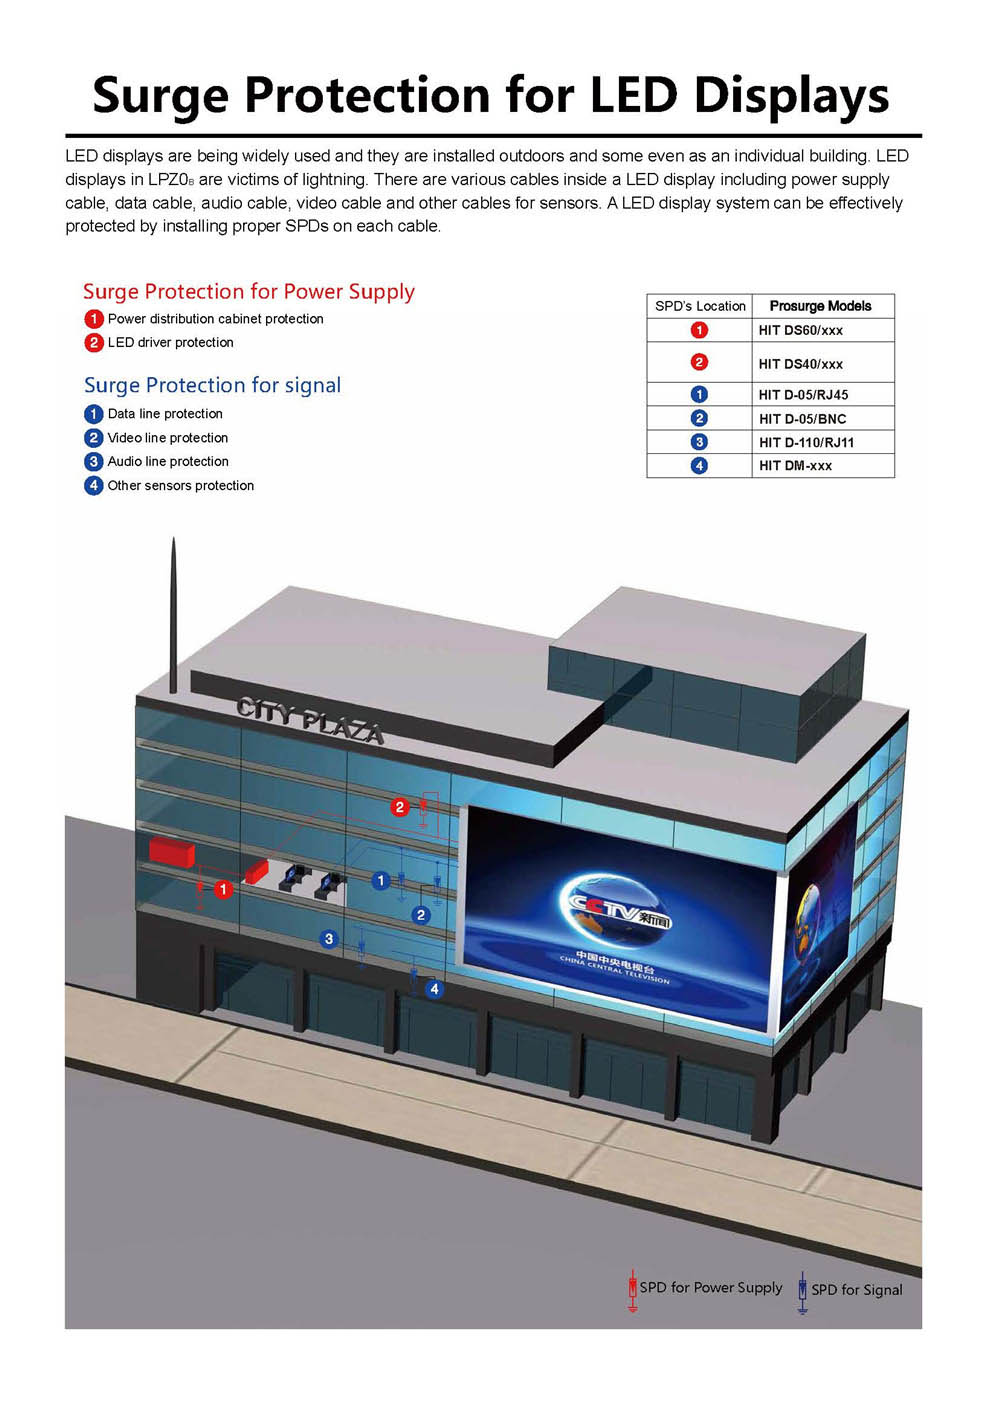 Surge Protection Solution for LED Display - Prosurge-single page.jpg